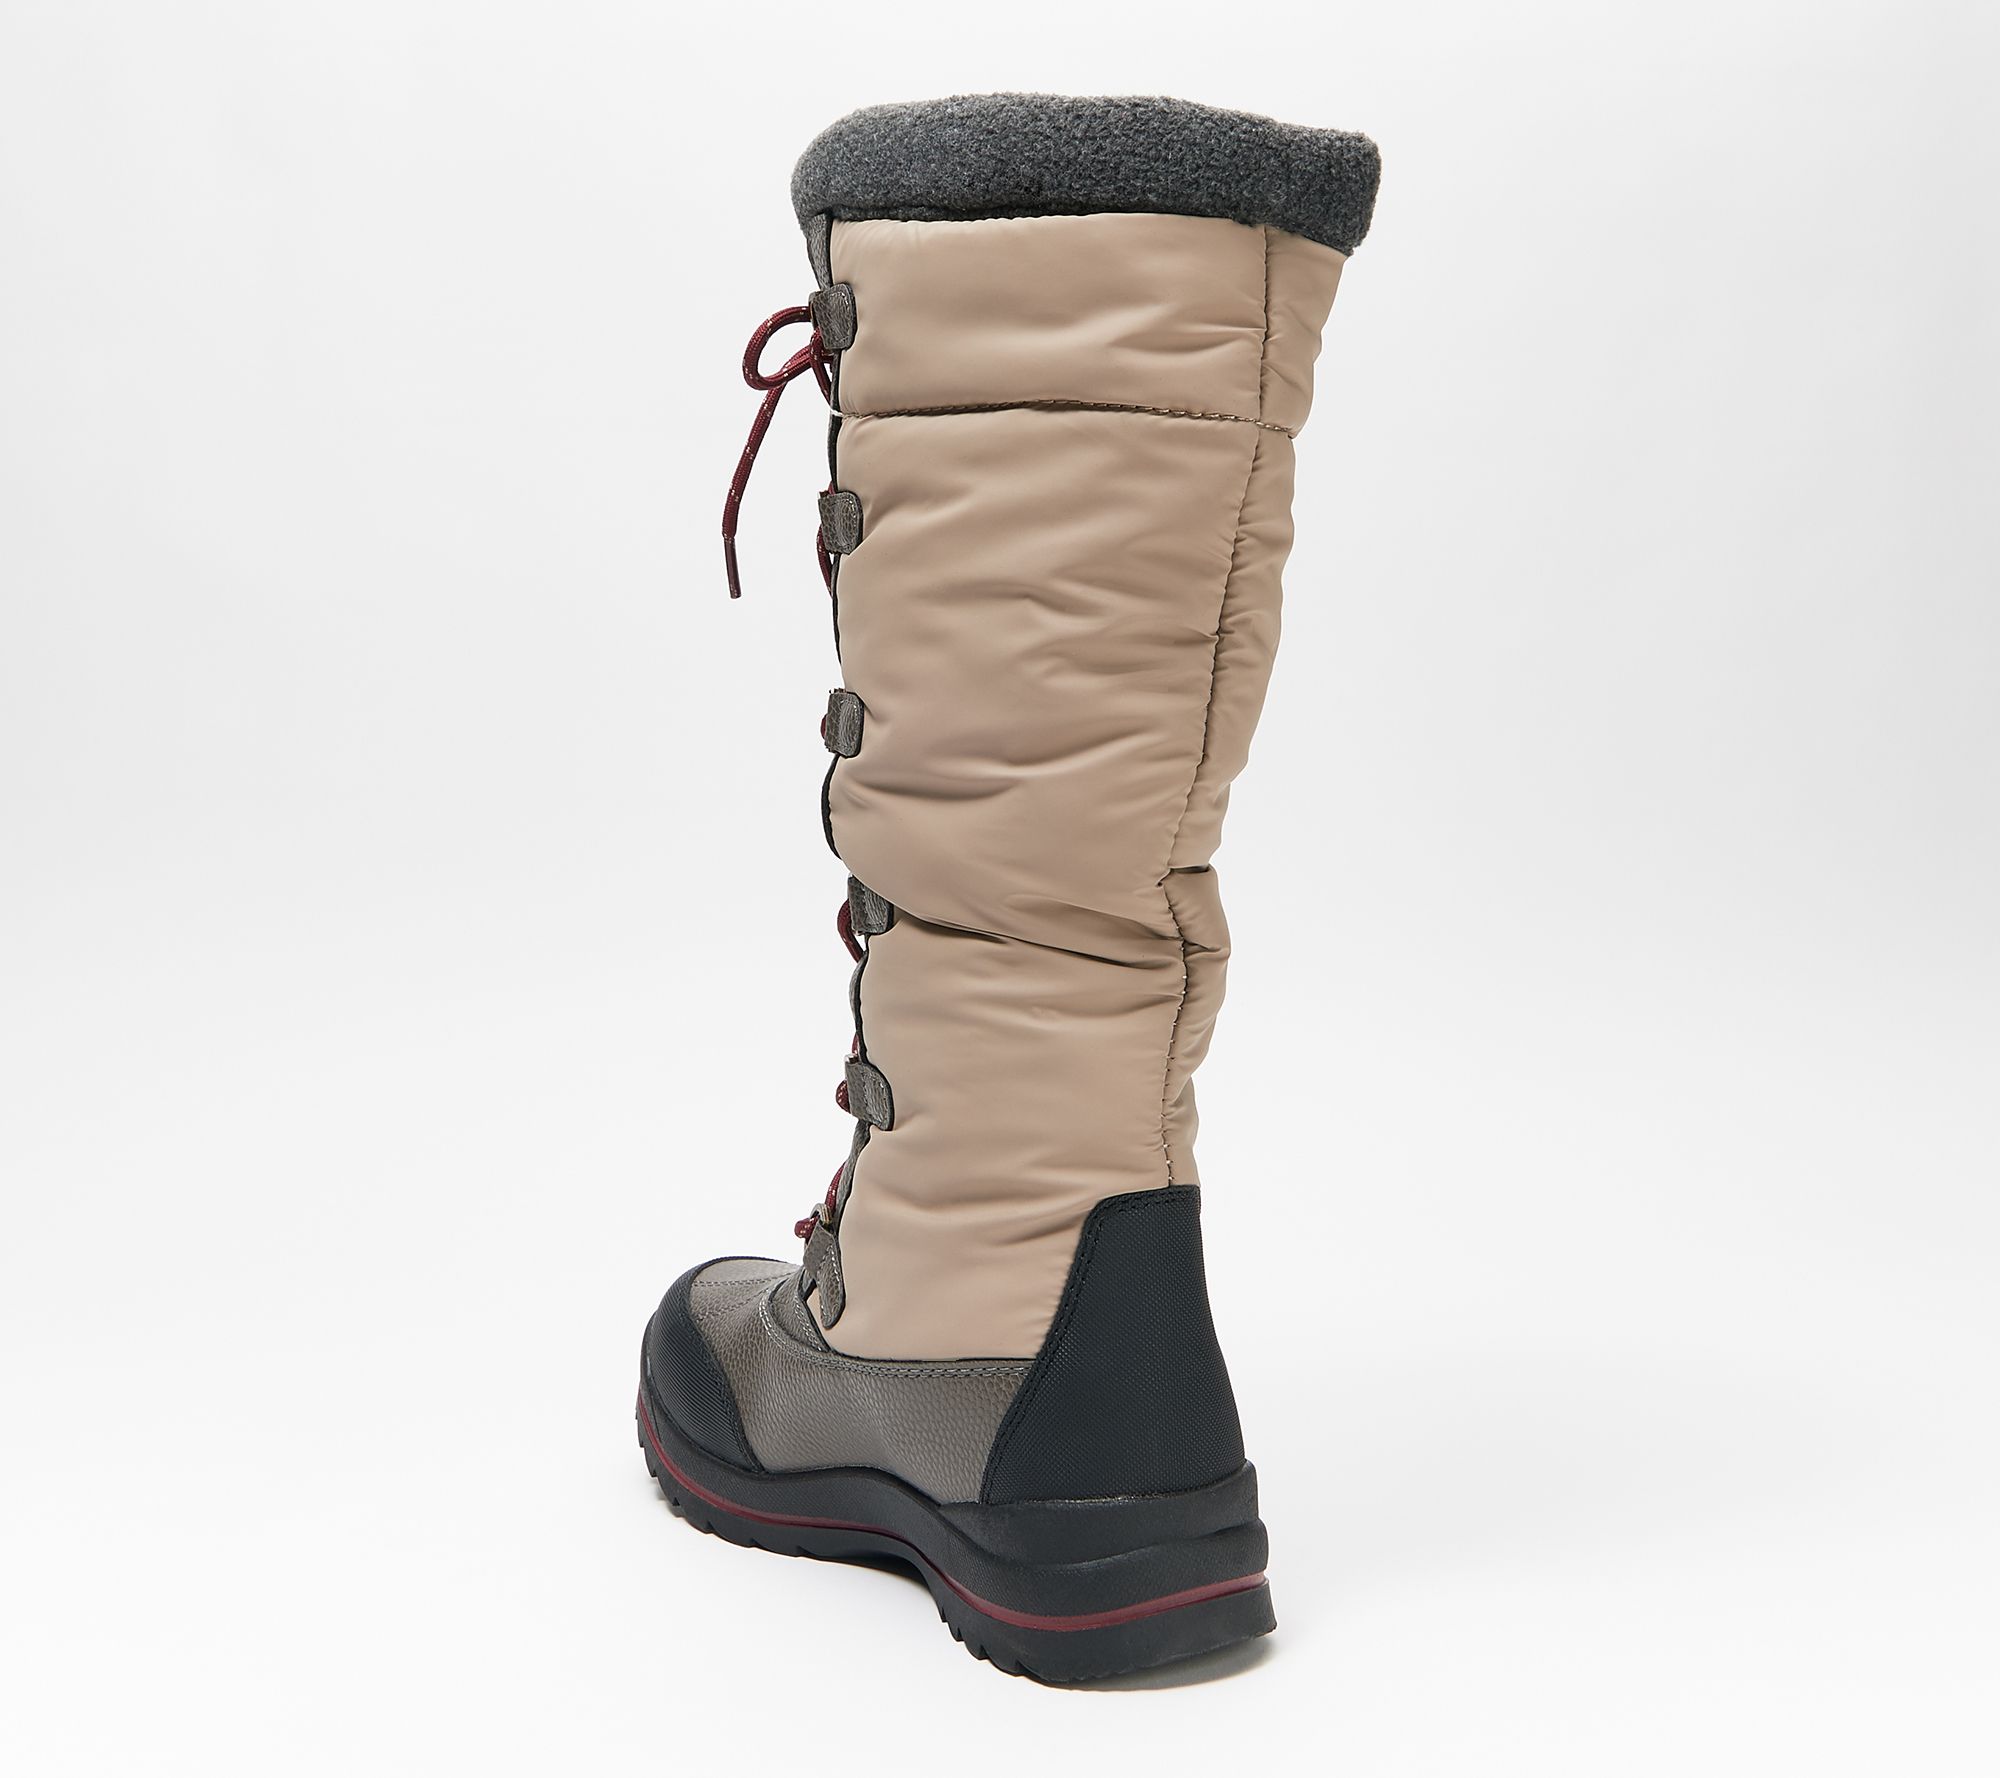 Cougar Waterproof Lace-Up Tall Shaft Snow Boots - Canuck - QVC.com